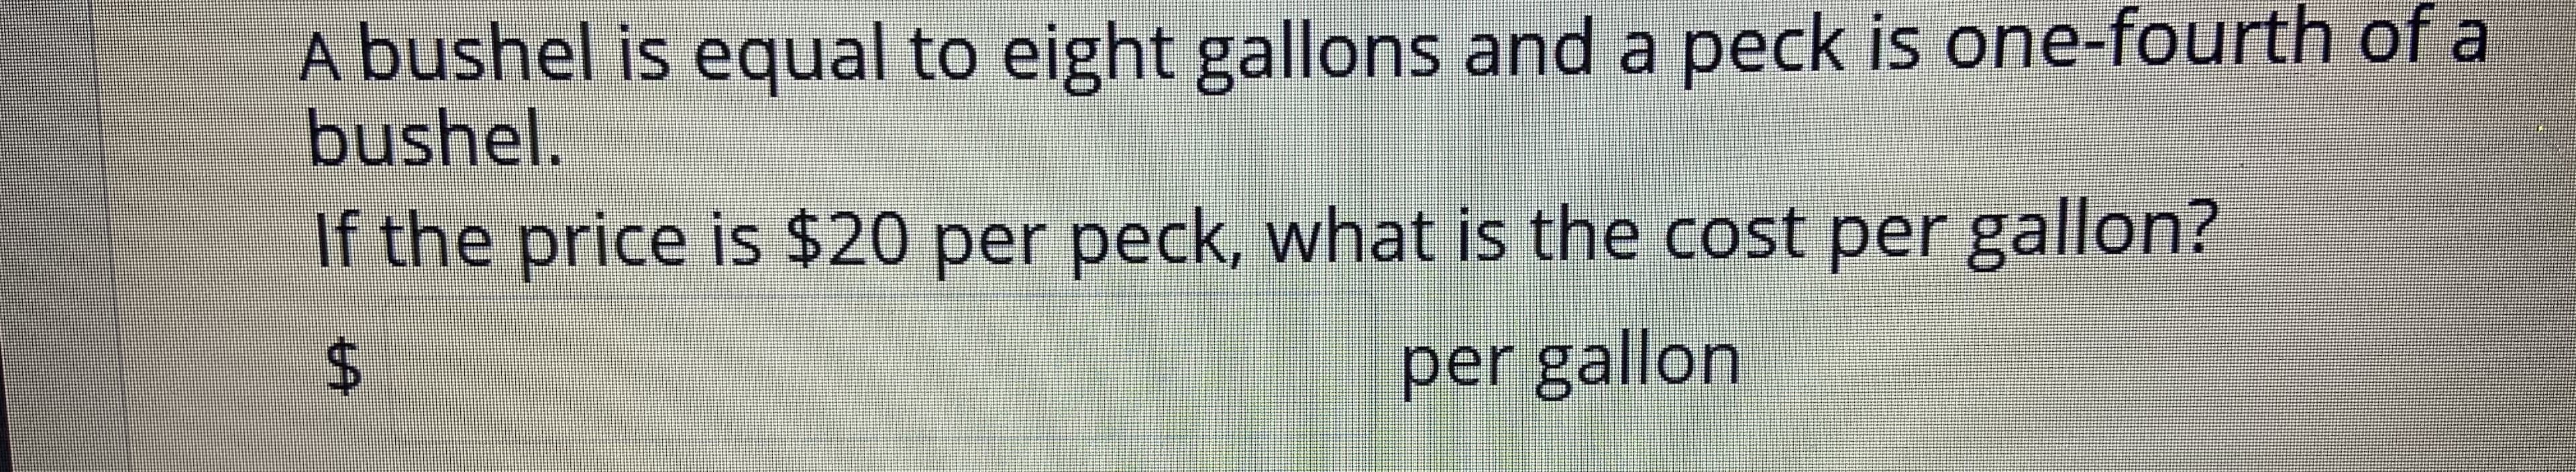 A bushel is equal to eight gallons and a peck is one-fourth of a
bushel.
If the price is $20 per peck, what is the cost per gallon?
per gallon
%24
